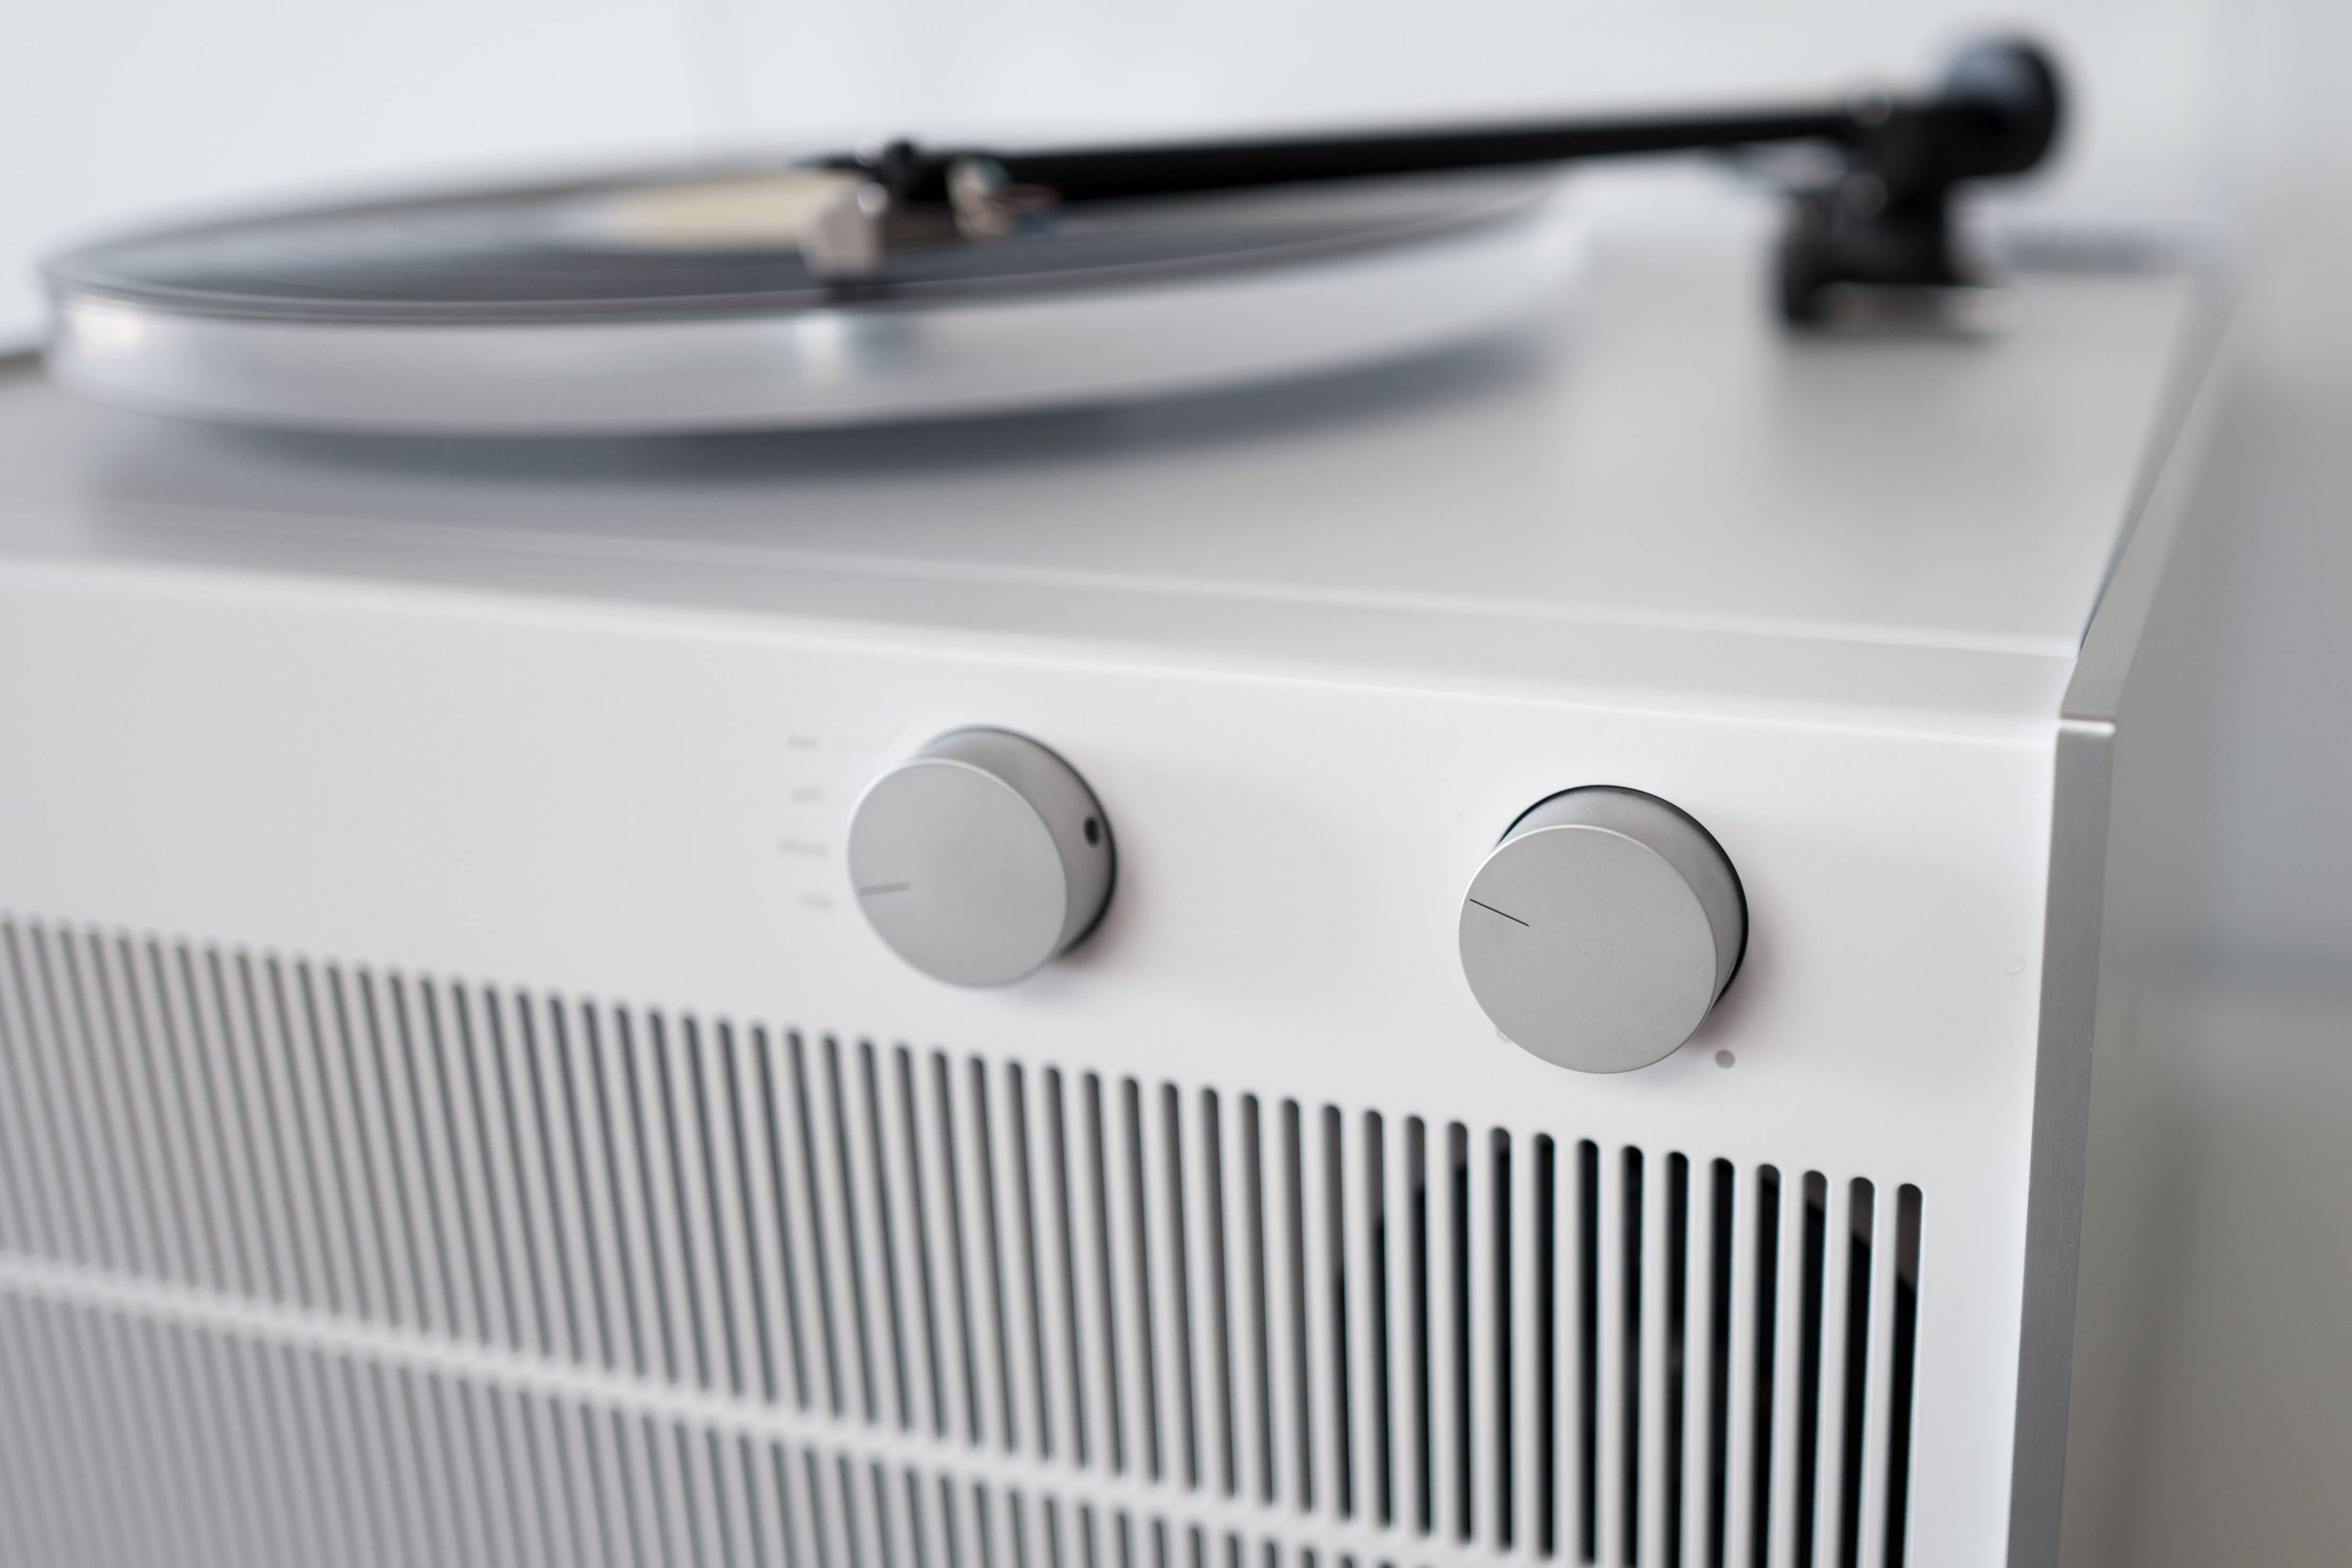 Mid-Century Modern Modern Record Player White Anodized Aluminum Tabletop Setup with Sonos Port